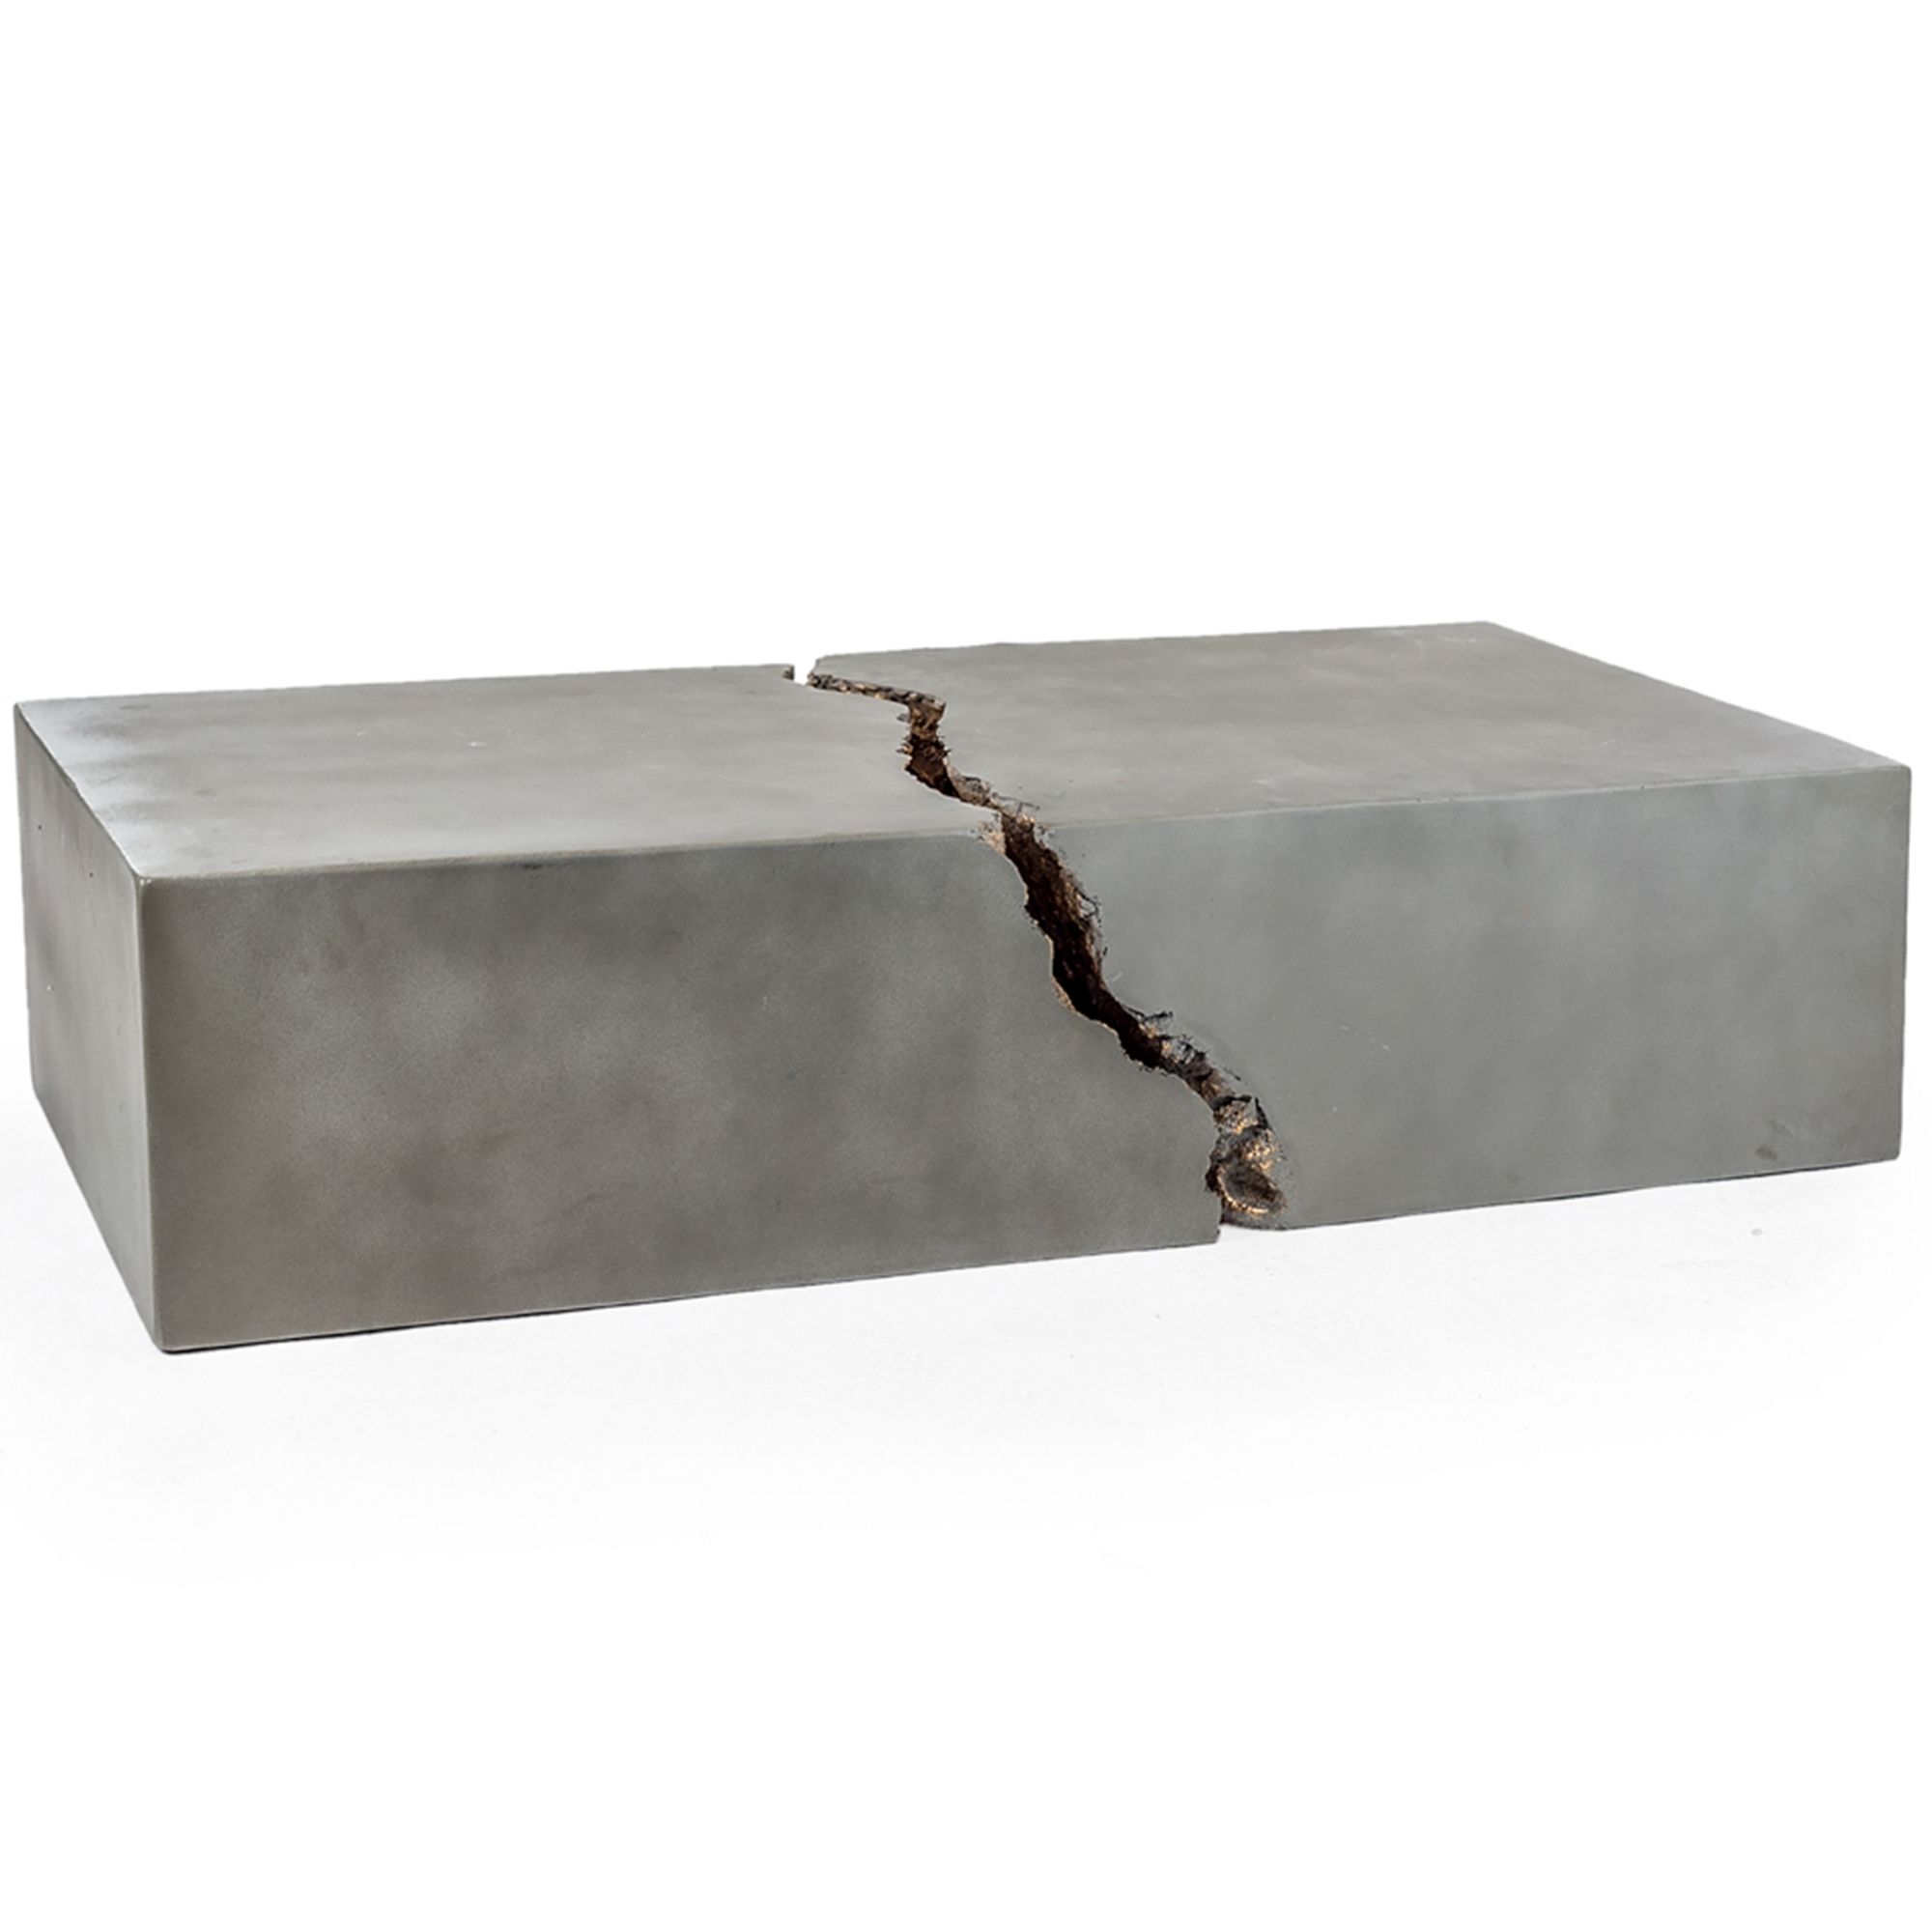 Concrete Core 2 Piece Coffee Table | Modern Furniture Online Within 2 Piece Coffee Tables (View 13 of 15)